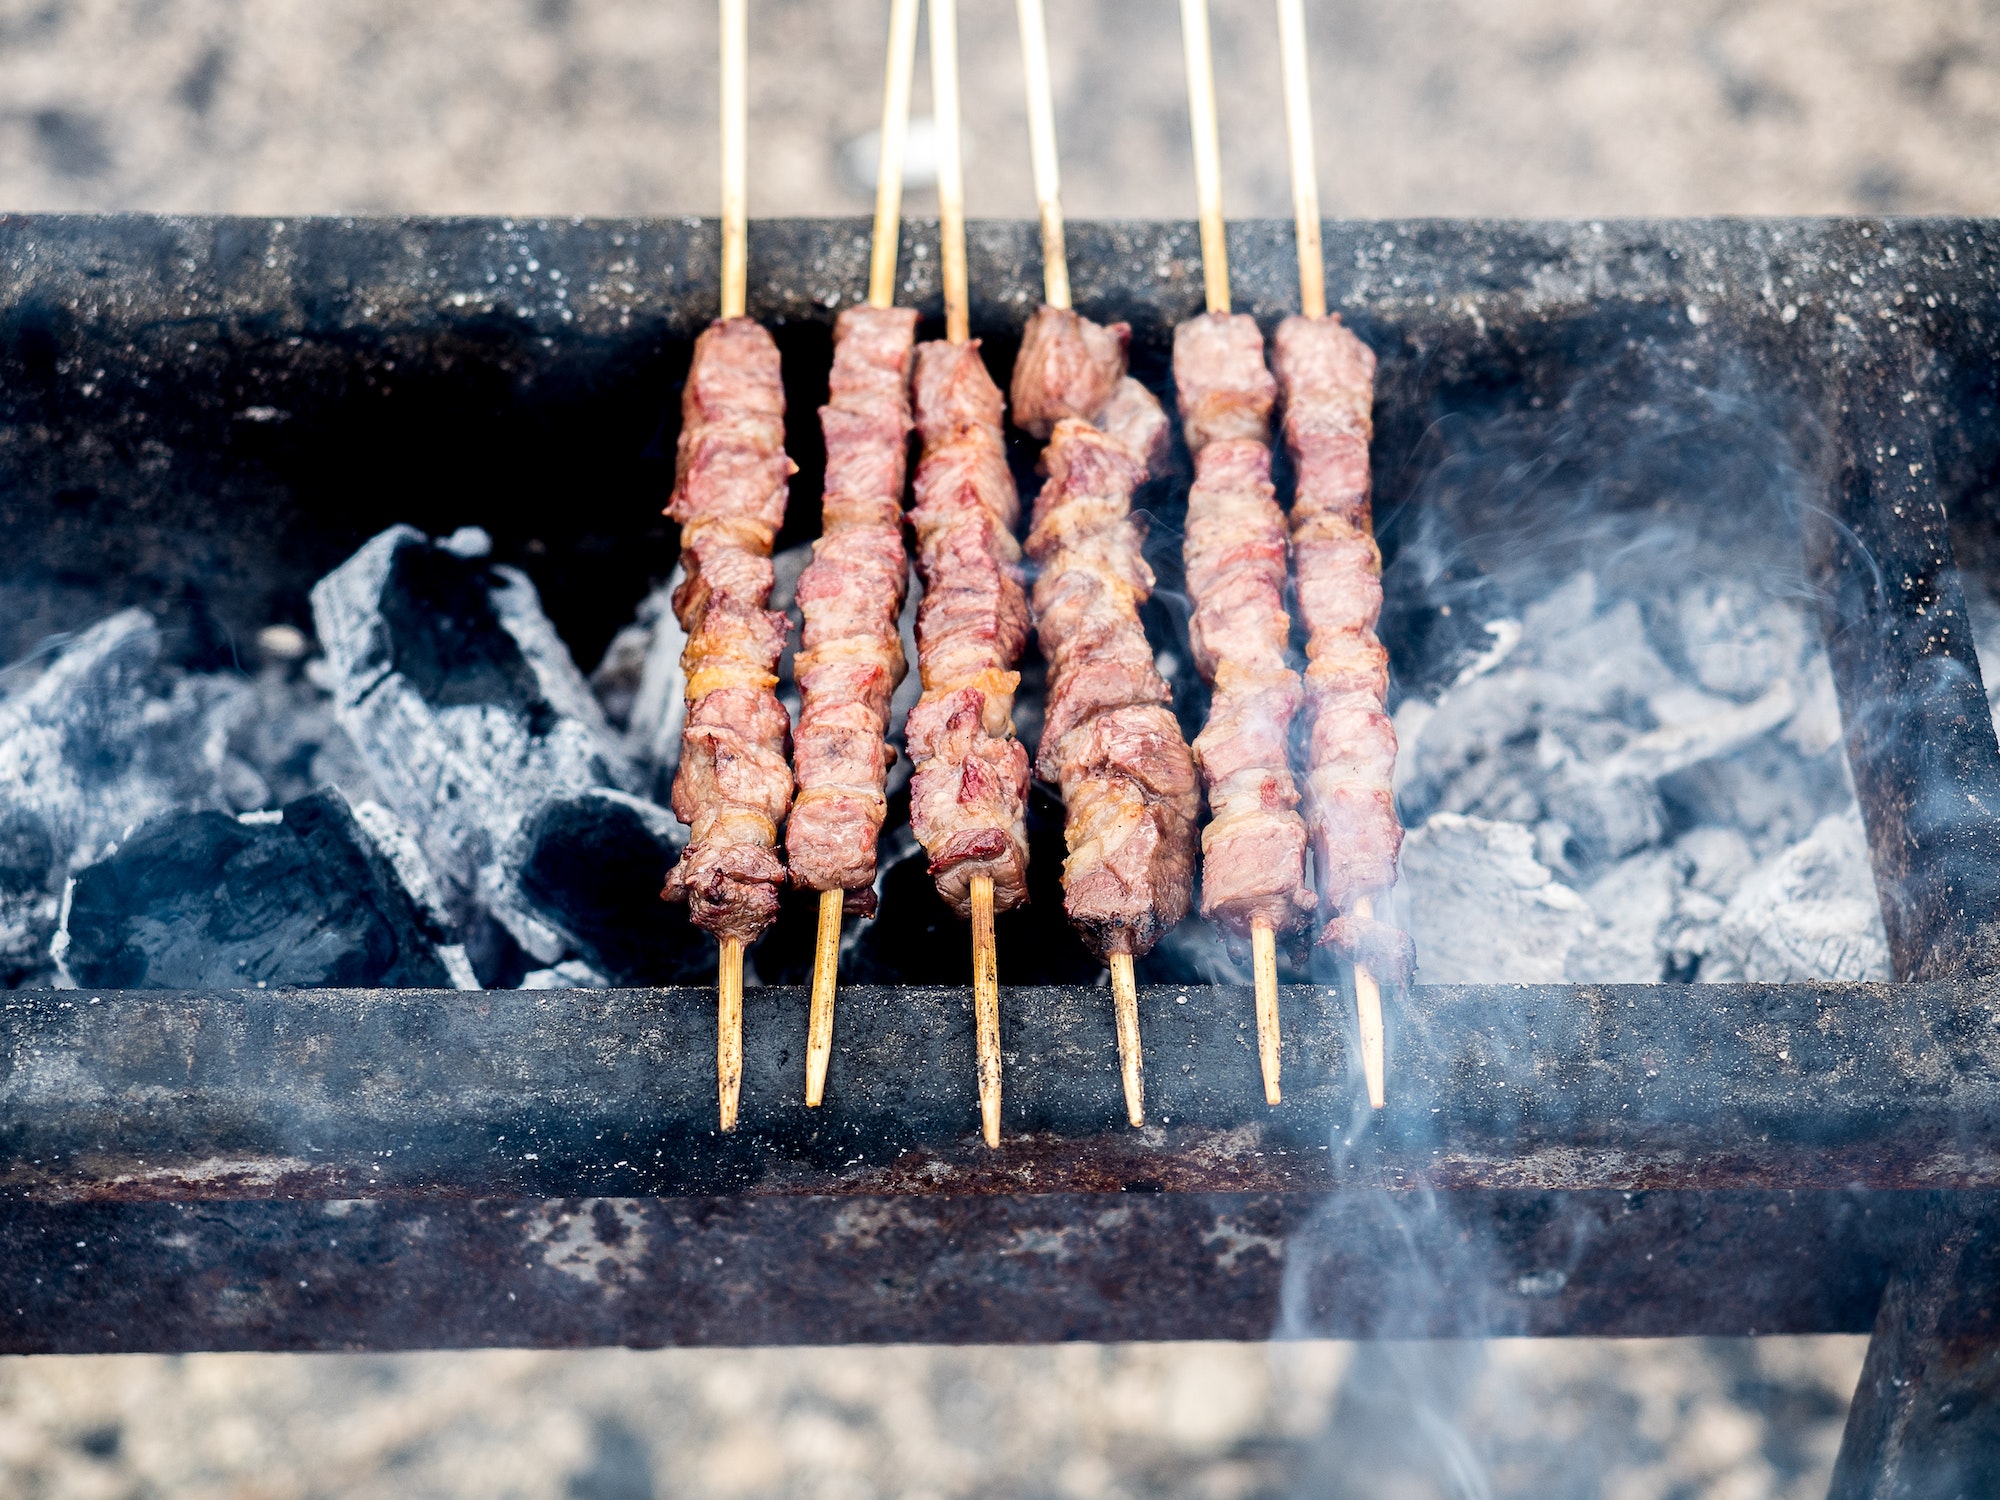 Arrosticini, the typical Abruzzese skewers of sheep meat (3 of 3)